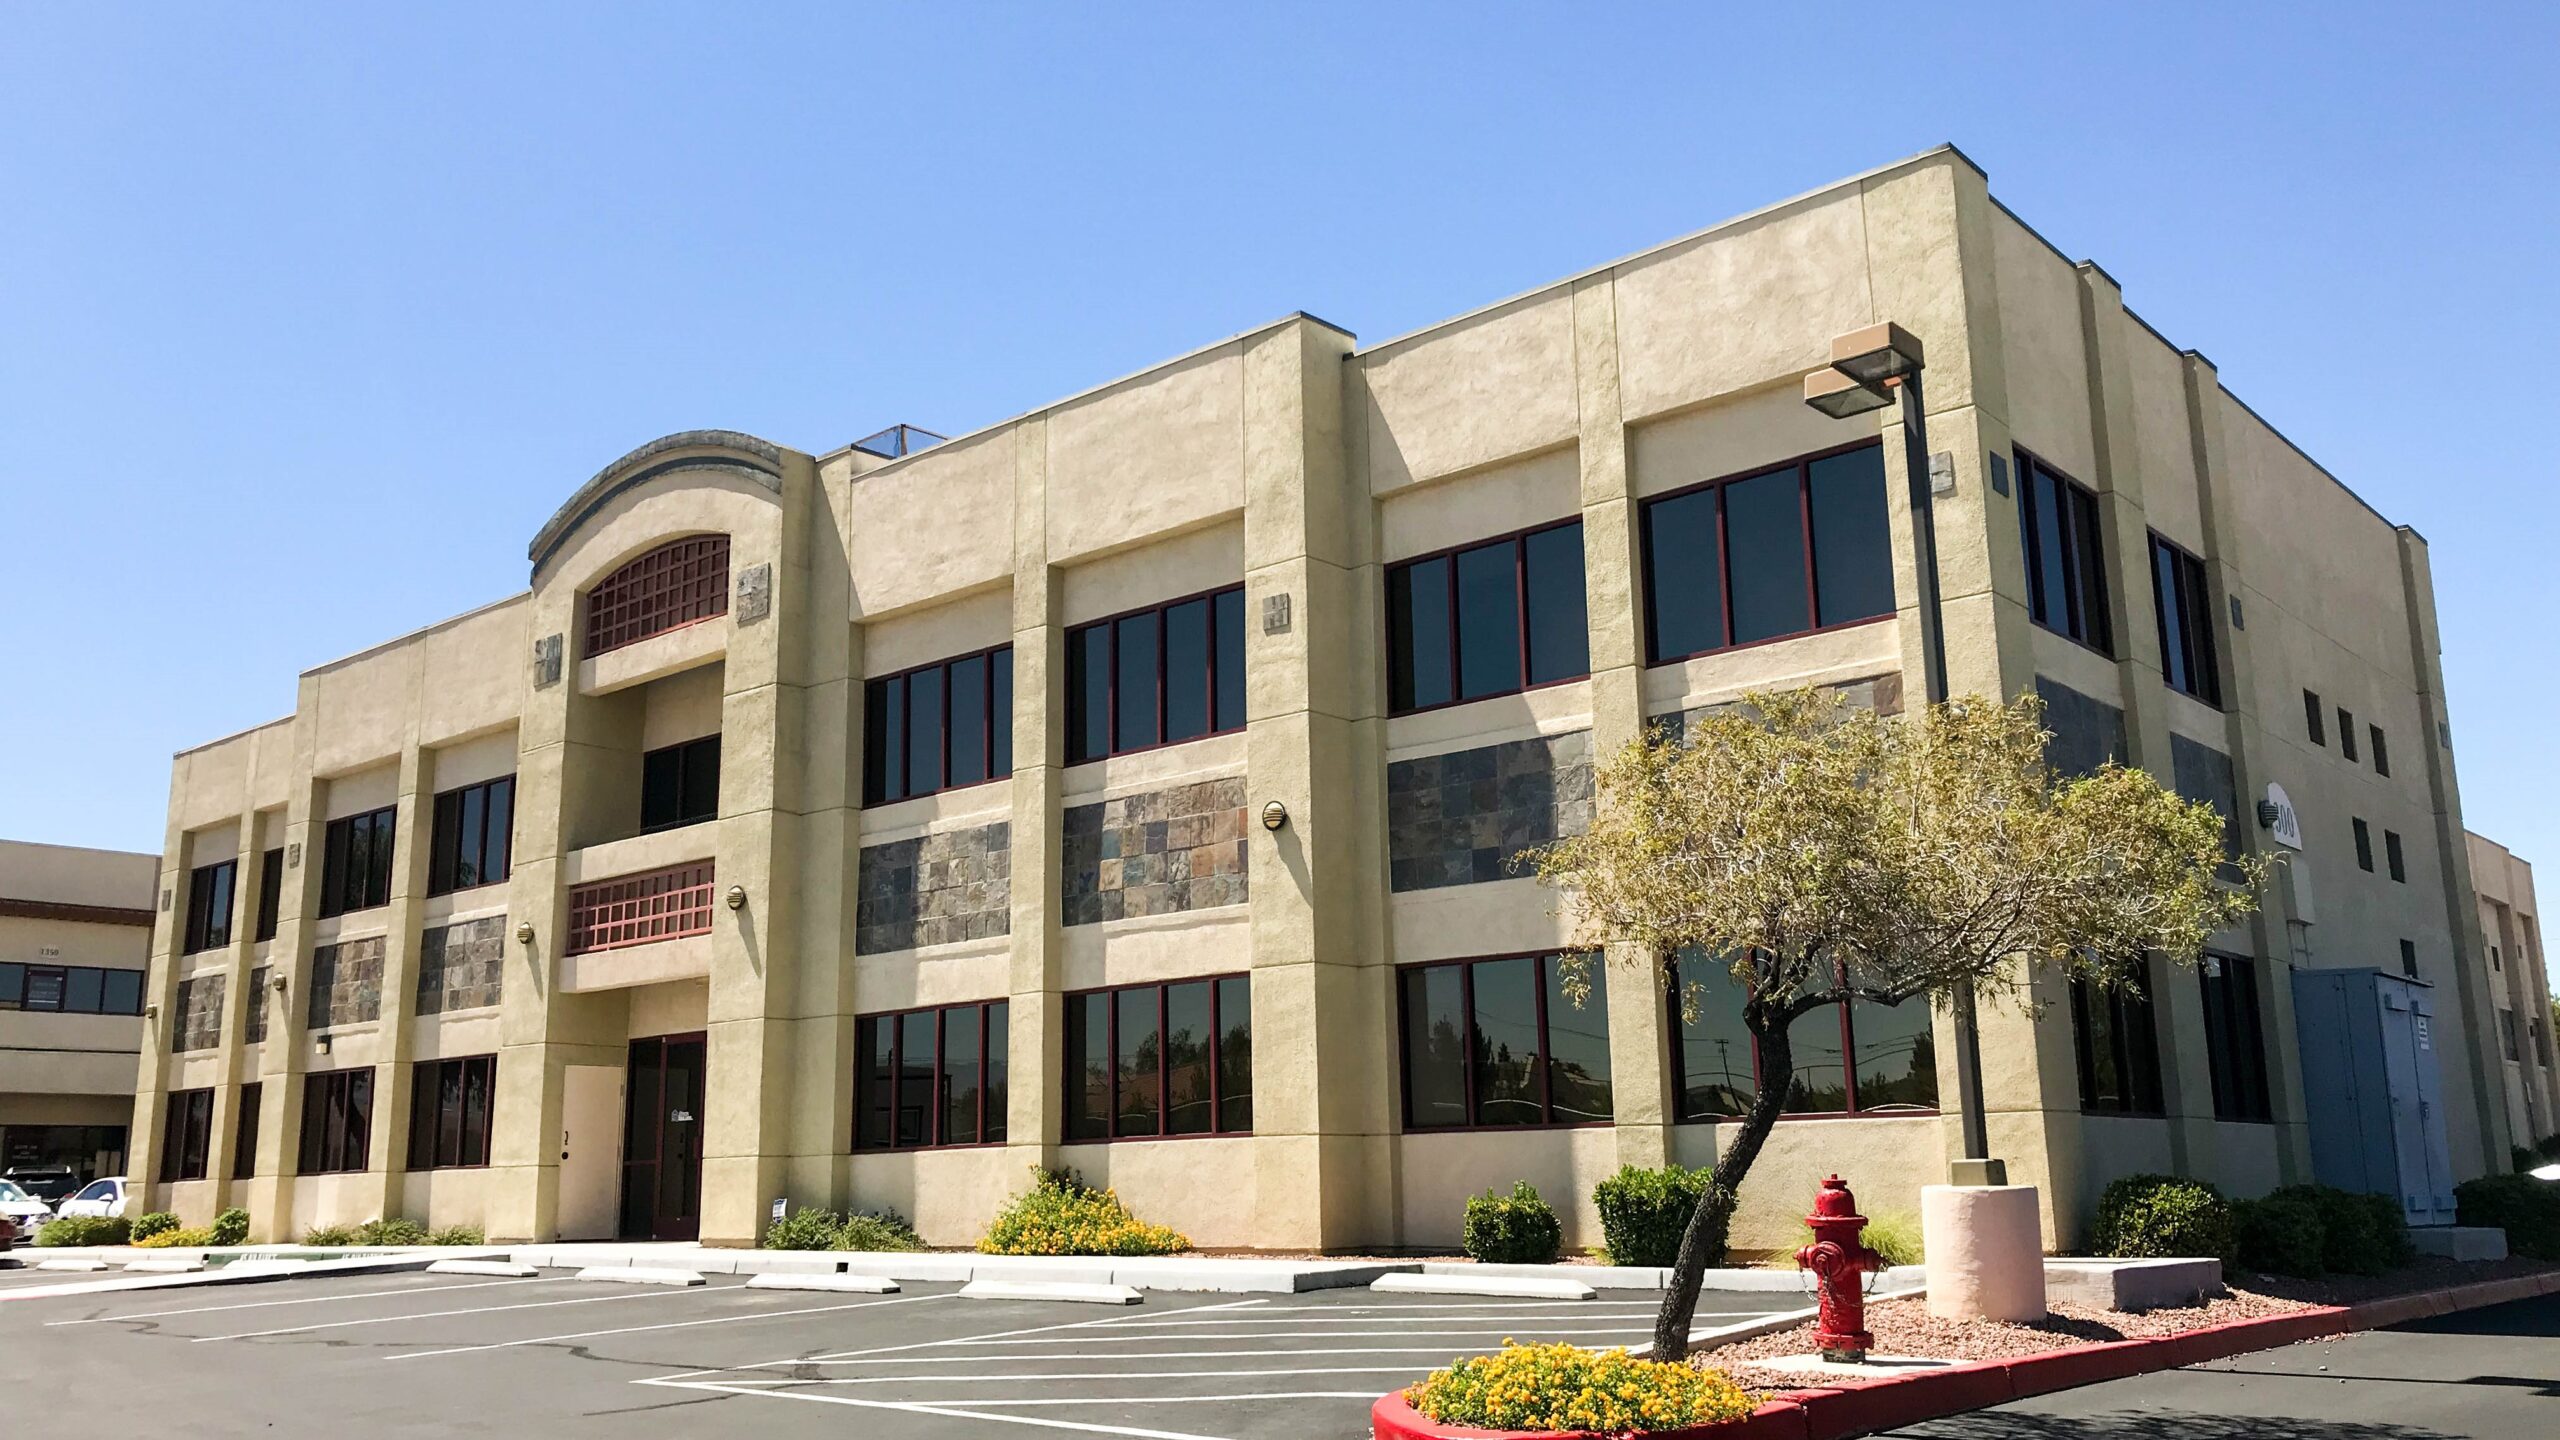 Two story commercial real estate building in Las Vegas